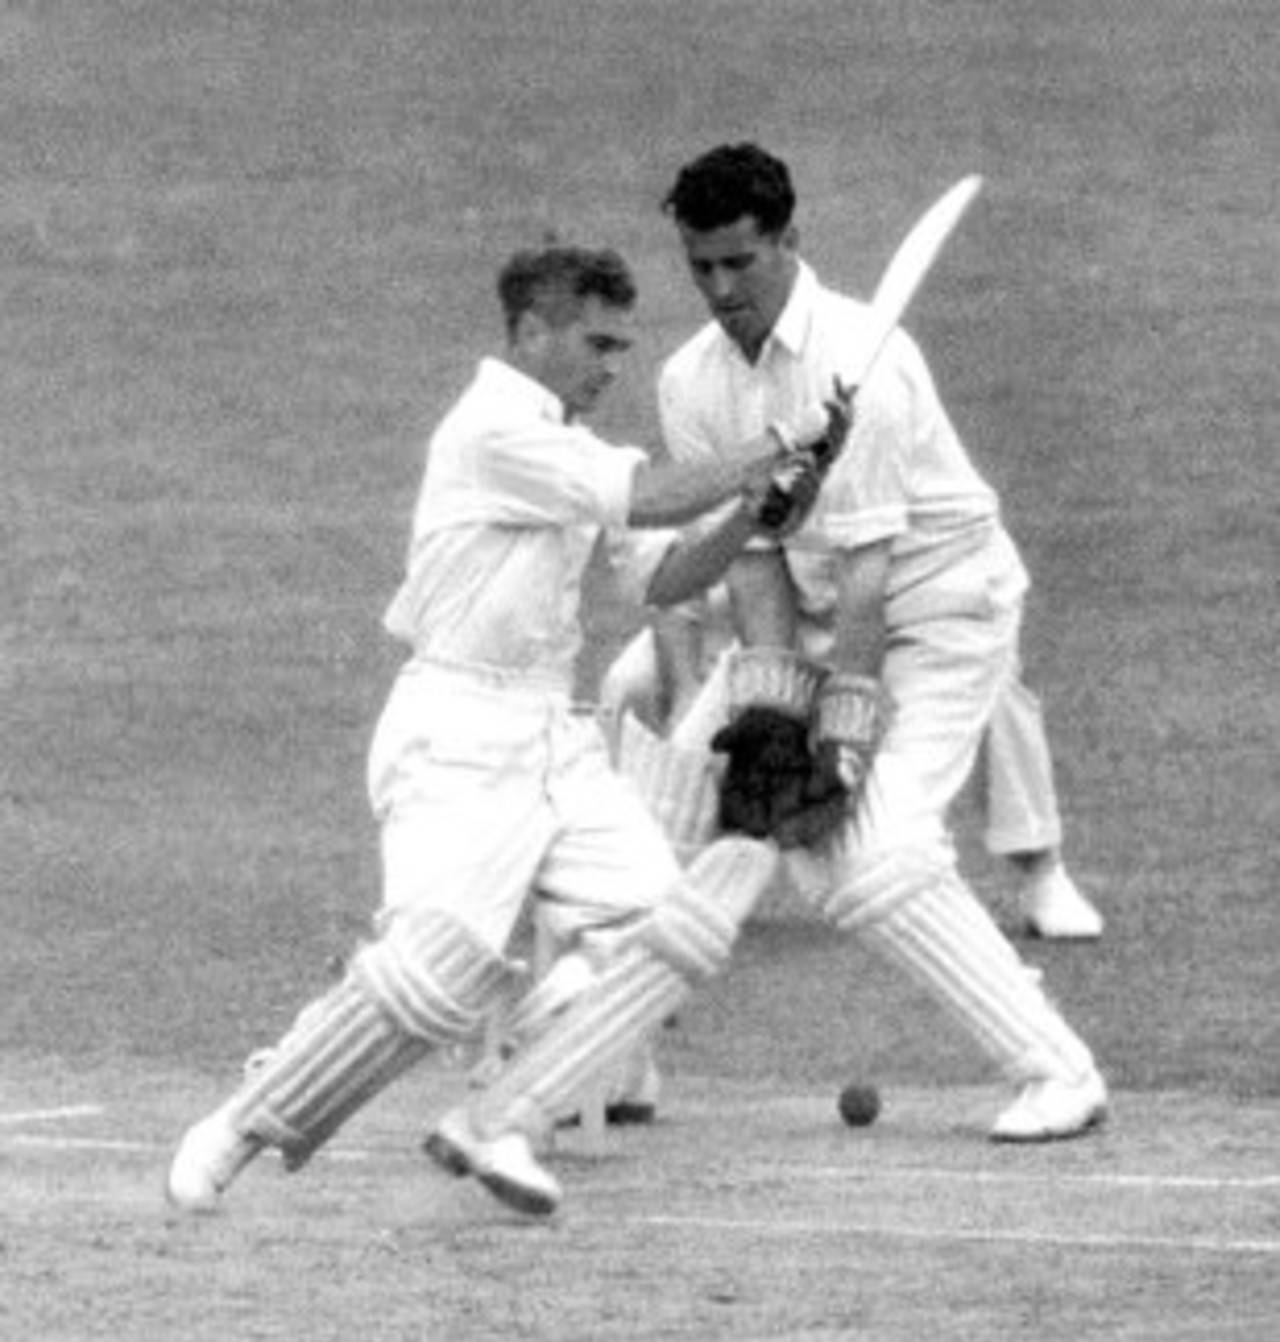 Tony Pawson goes for a pull, Kent v Middlesex, August 10, 1950